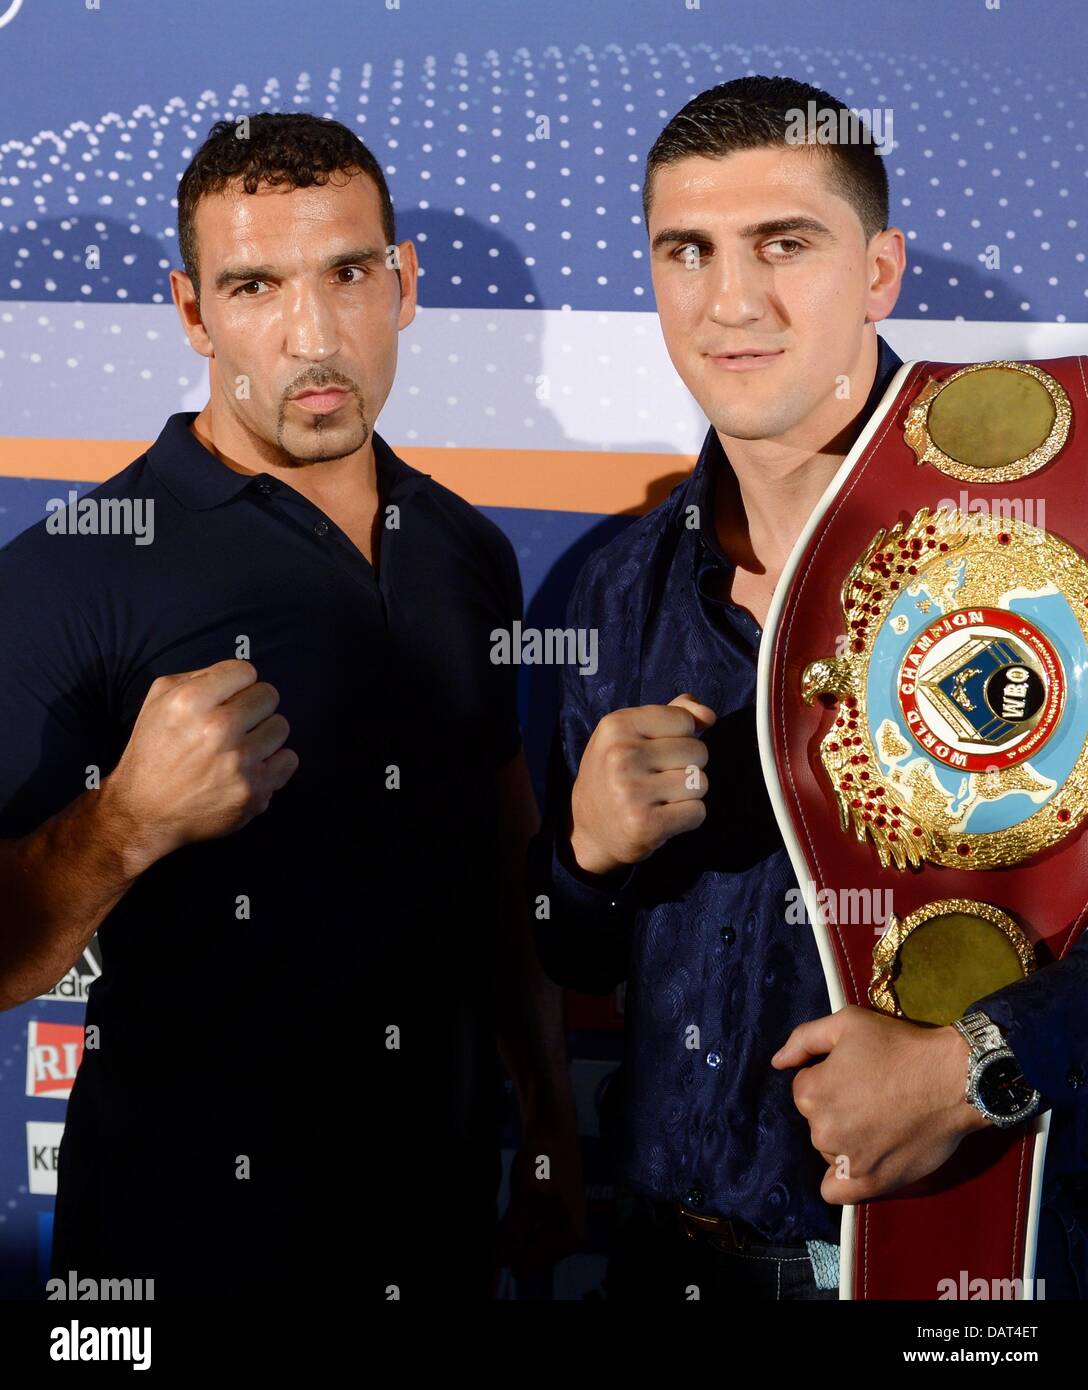 German professional boxers Firat Arslan (L) and Marco Huck (R) stand during a press conference in Schleyer Hall in Stuttgart, Germany, 18 July 2013. Marco Huck will defend his WBO world cruiserweight championship against Firat Arslan on 14 September. Photo: BERND WEISSBROD Stock Photo